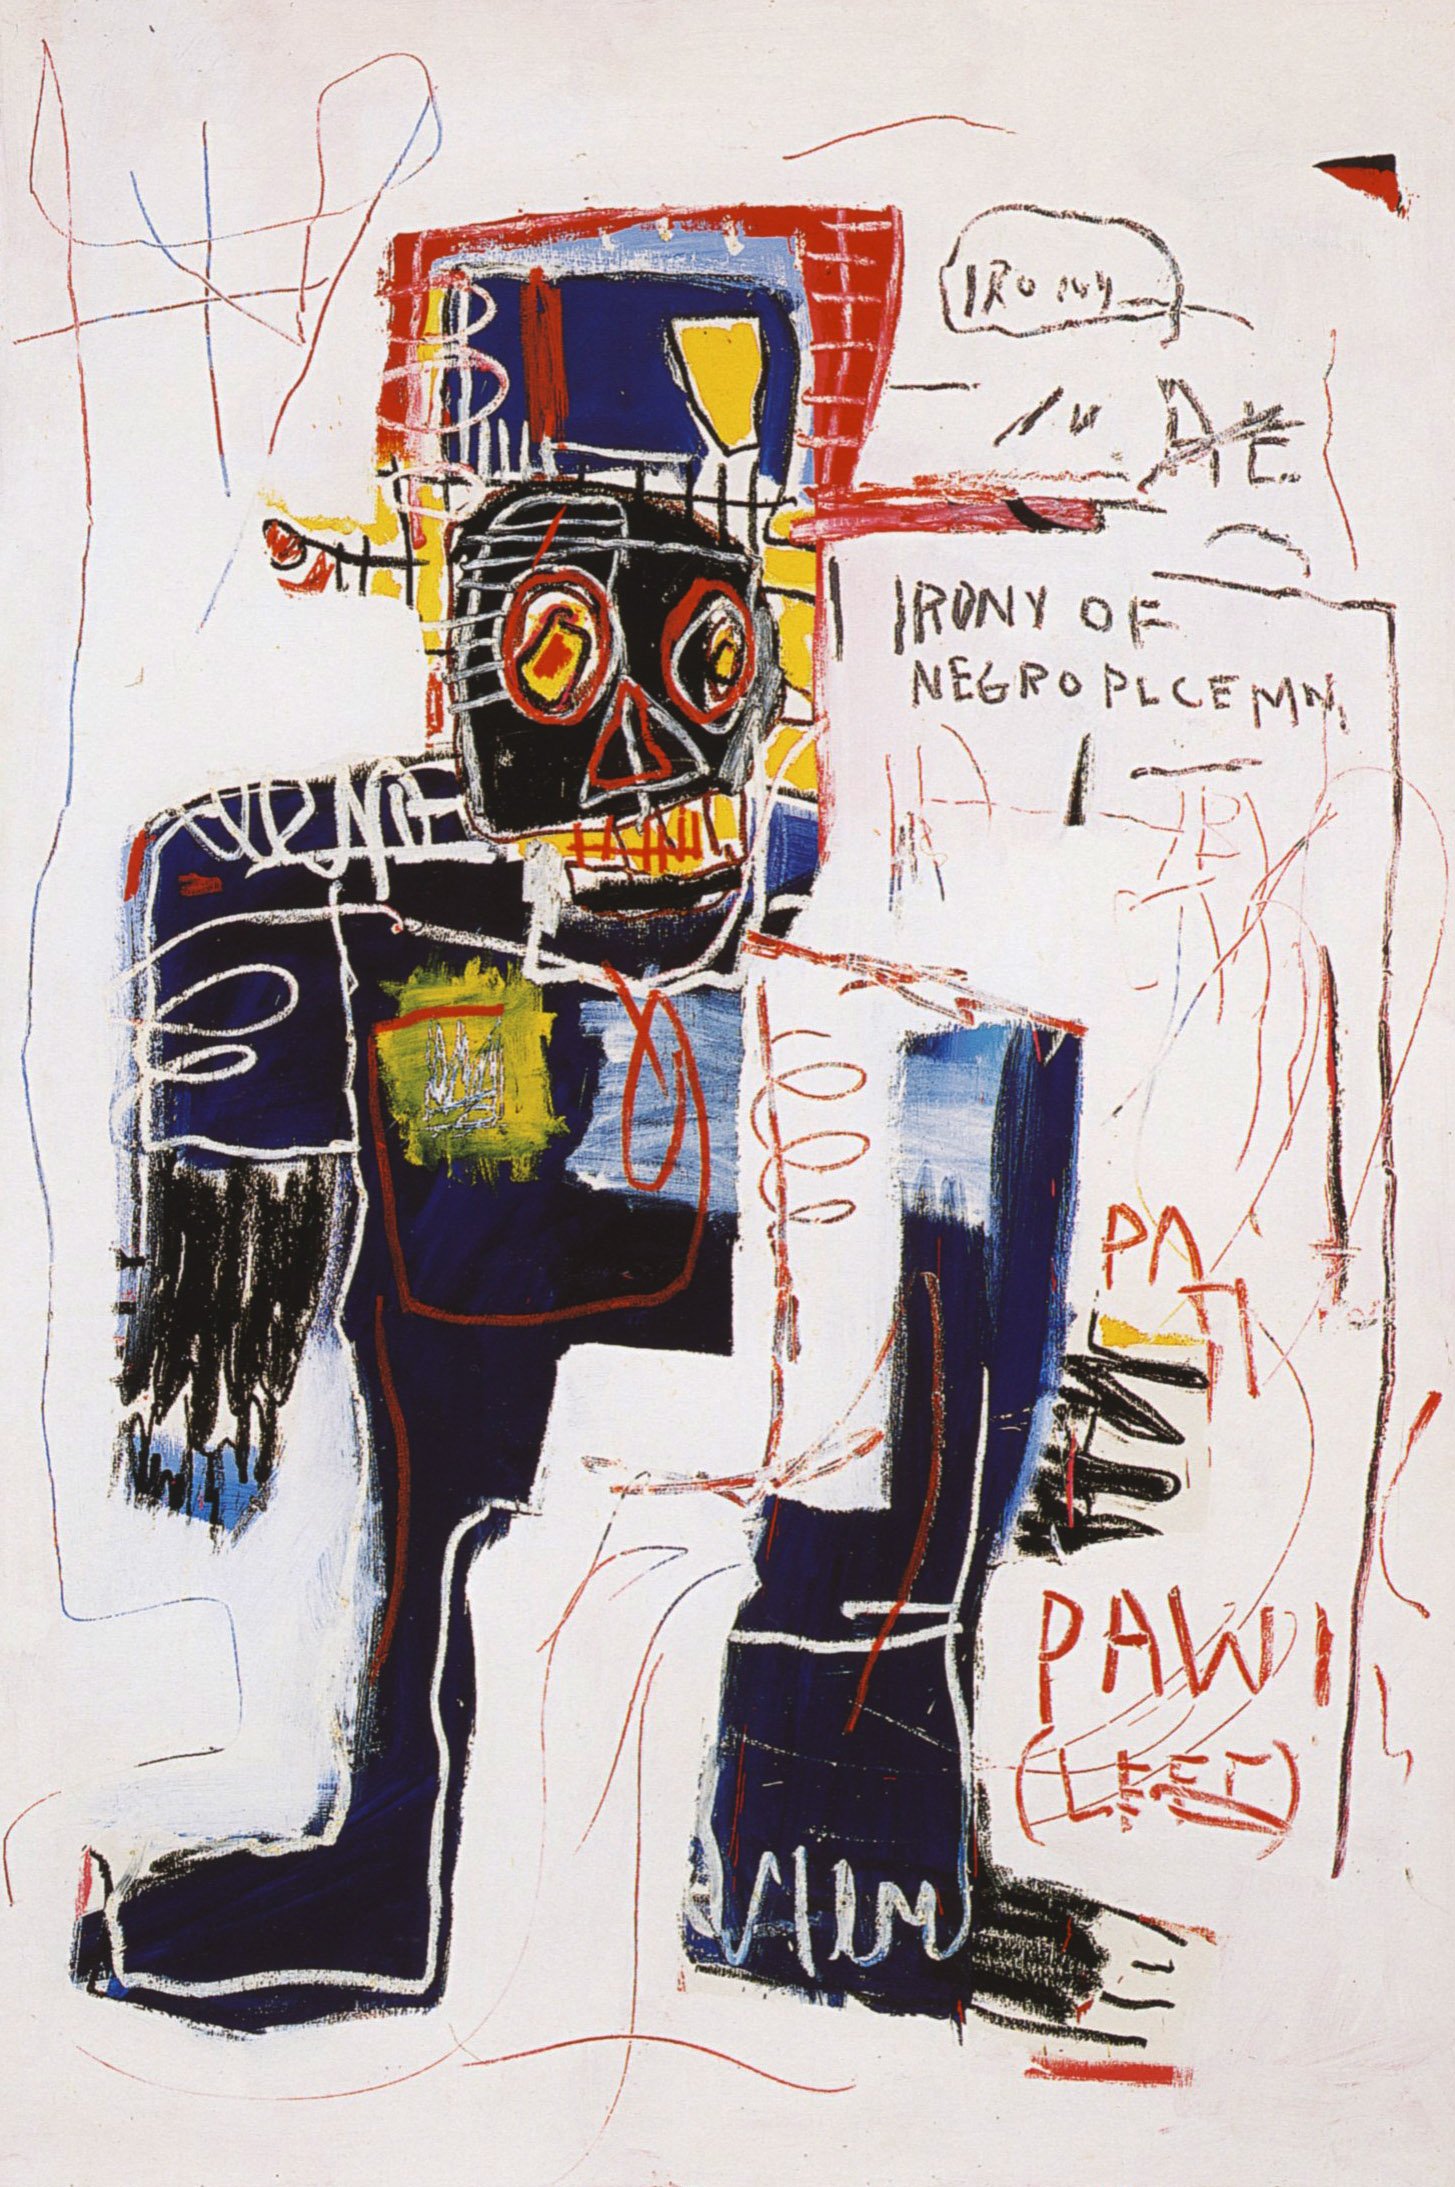 An abstract depiction of the “Irony of a Negro Policeman” by Jean-Michel Basquiat. The image features a Black policeman, whose face is reminiscent of a mask and wearing a hat that bears similarity to a cage. The phrase “IRONY OF NEGRO PLEMN”, is explicitly inscribed on the painting's right side. The word “Pawn” sits at the artwork's bottom right corner, indicating the role of the figure.